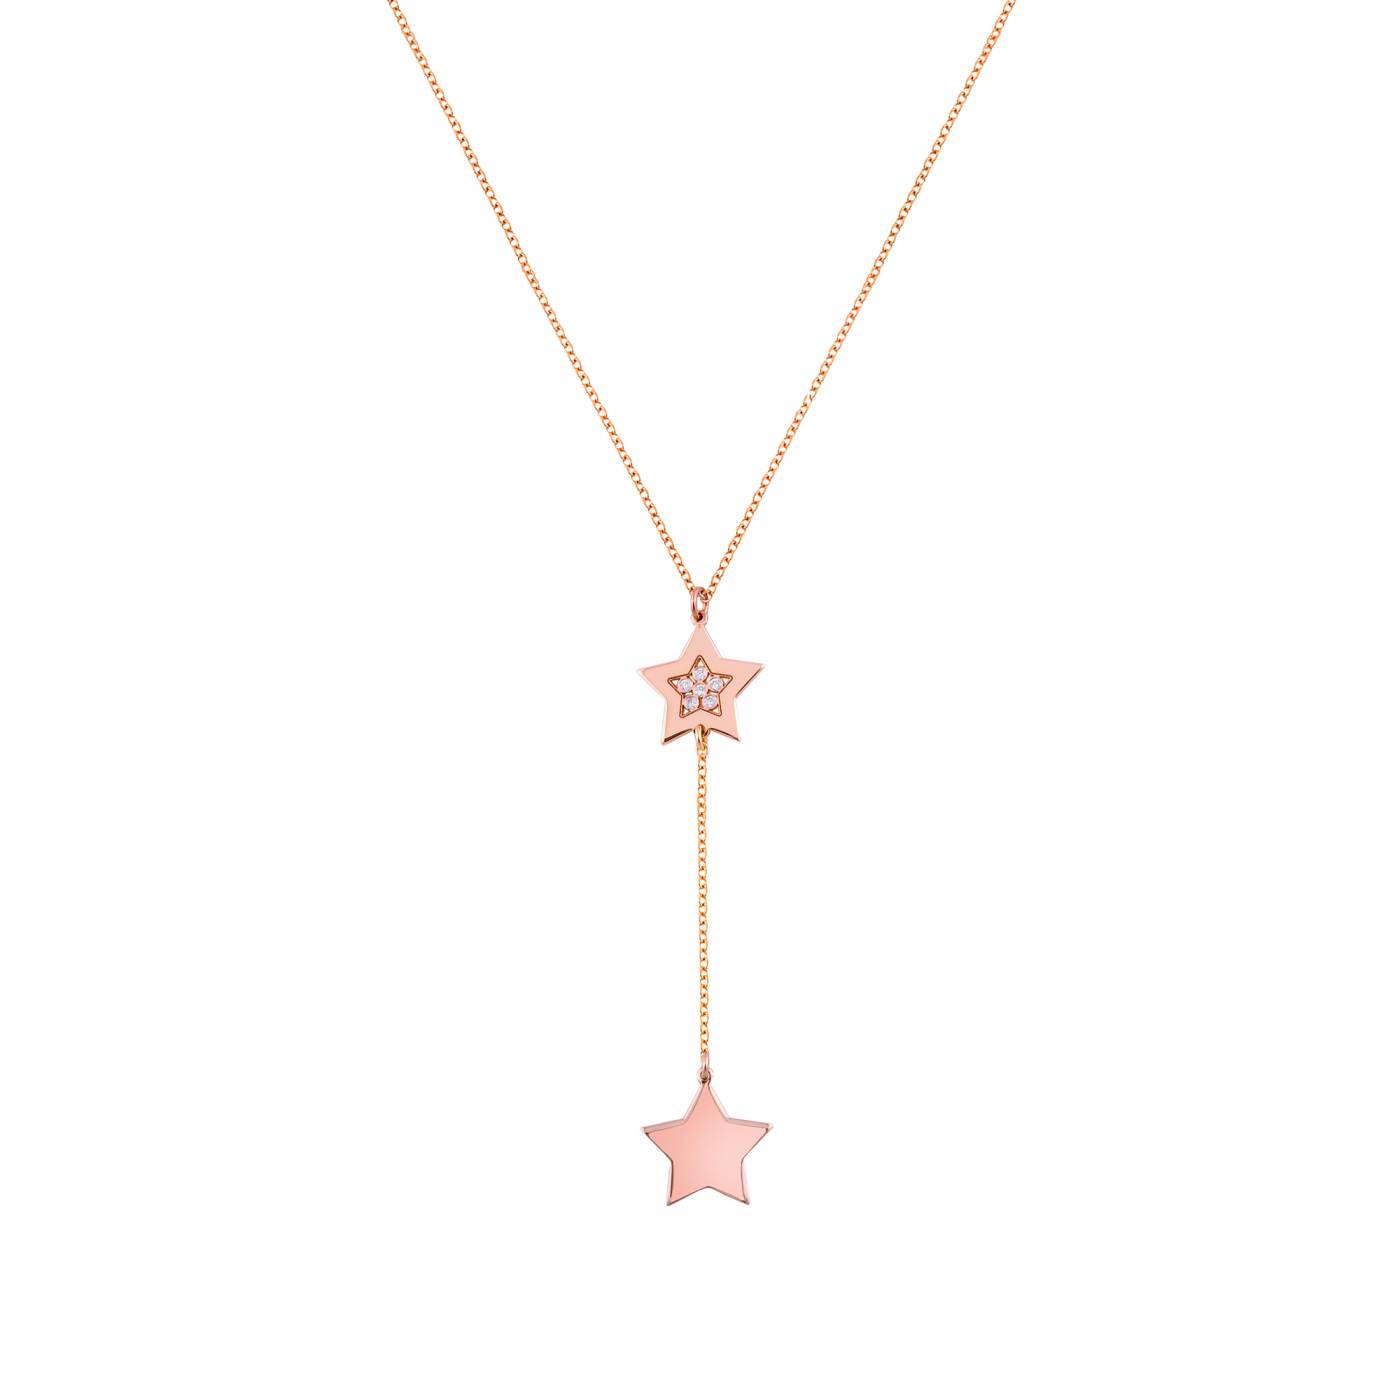 ROSE GOLD 14K NECKLACE STAR AND DIAMONDS